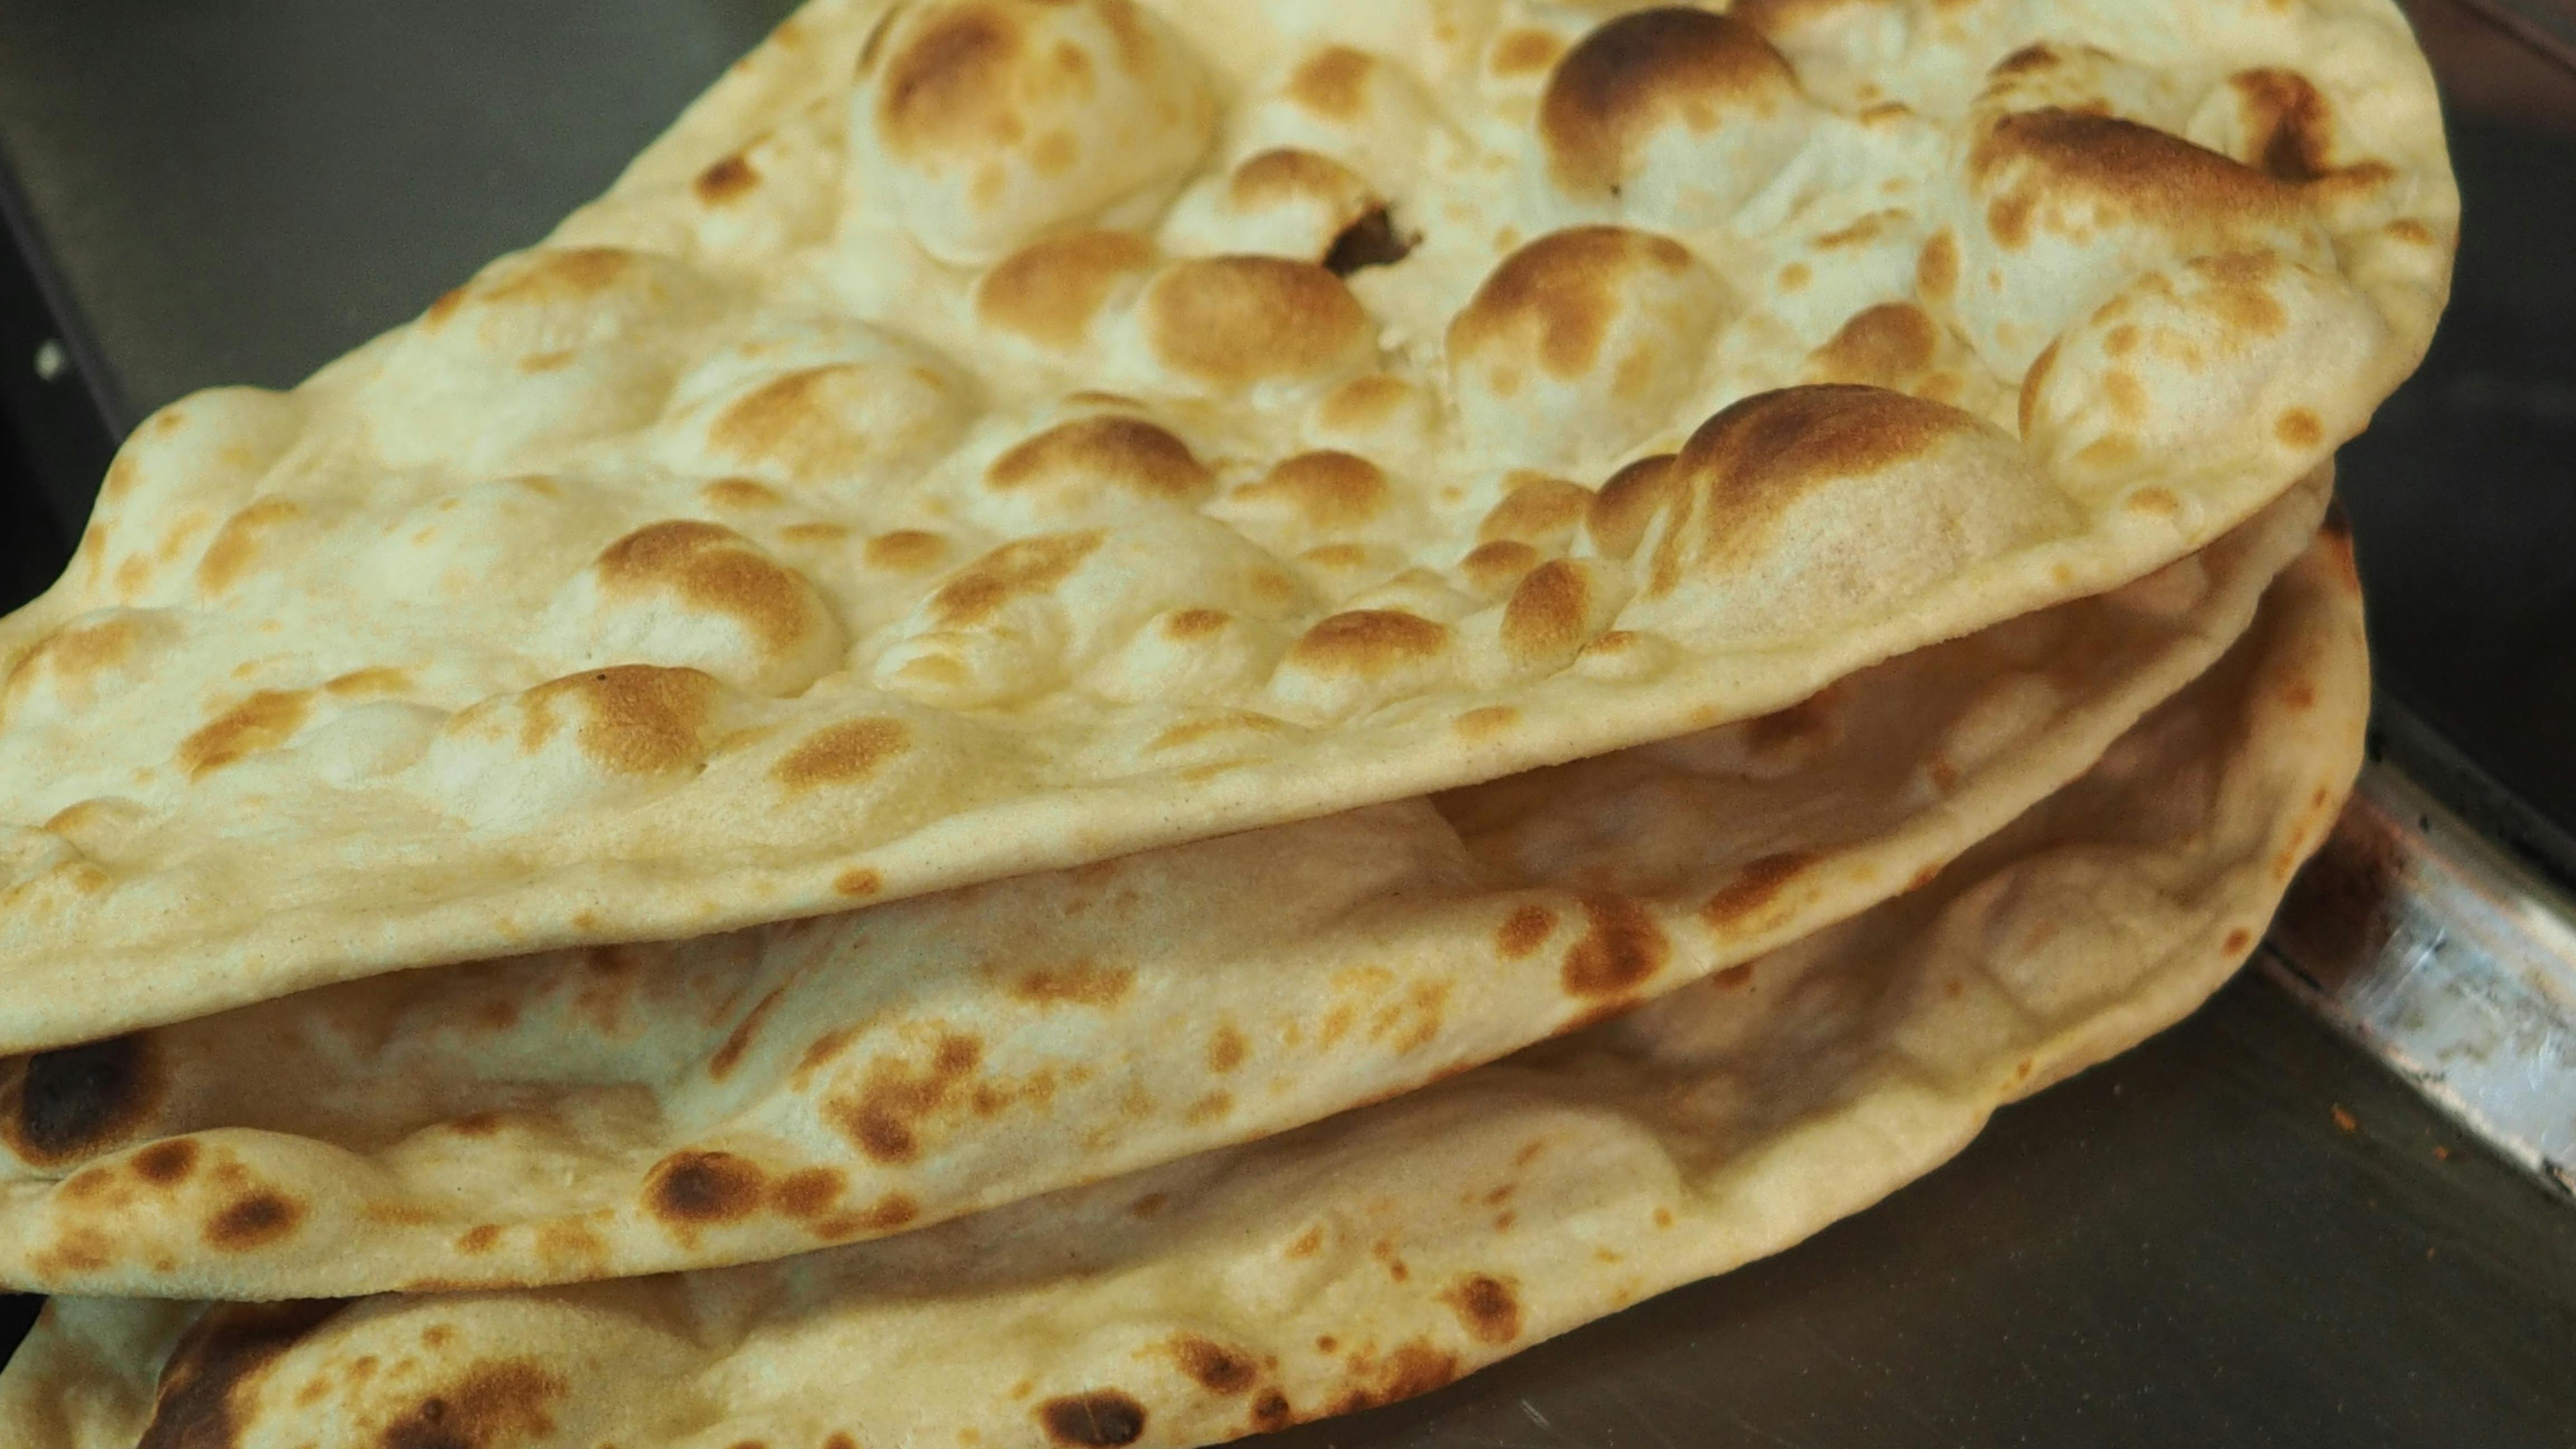 Free stock photo of cooking, cooking naan bread, naan